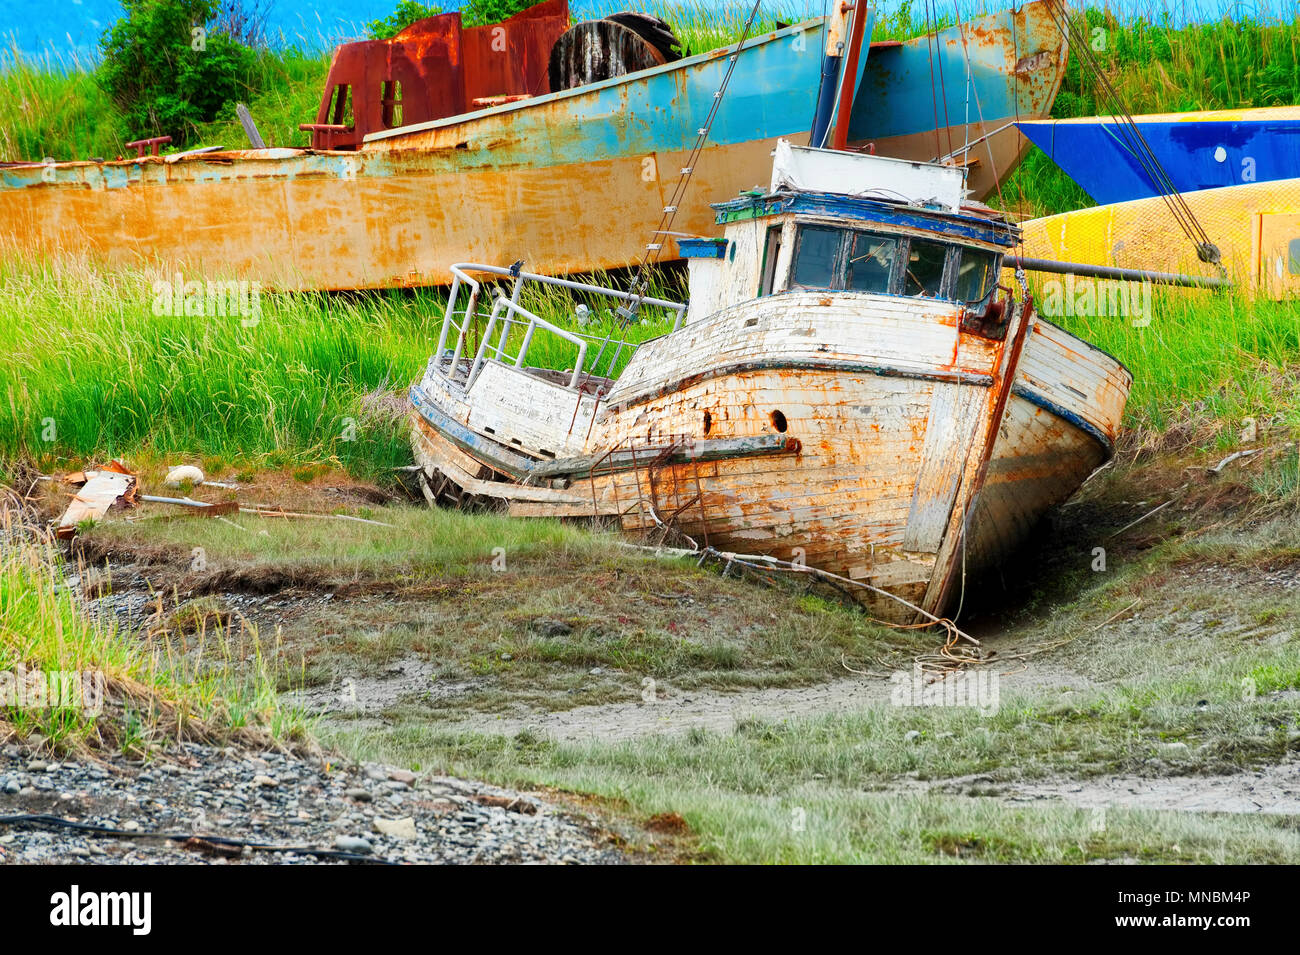 An old abandoned rotting boat sits in a muddy field that appear to be a graveyard for old boats.  Seen from the walking path along Kachemak Bay . Stock Photo